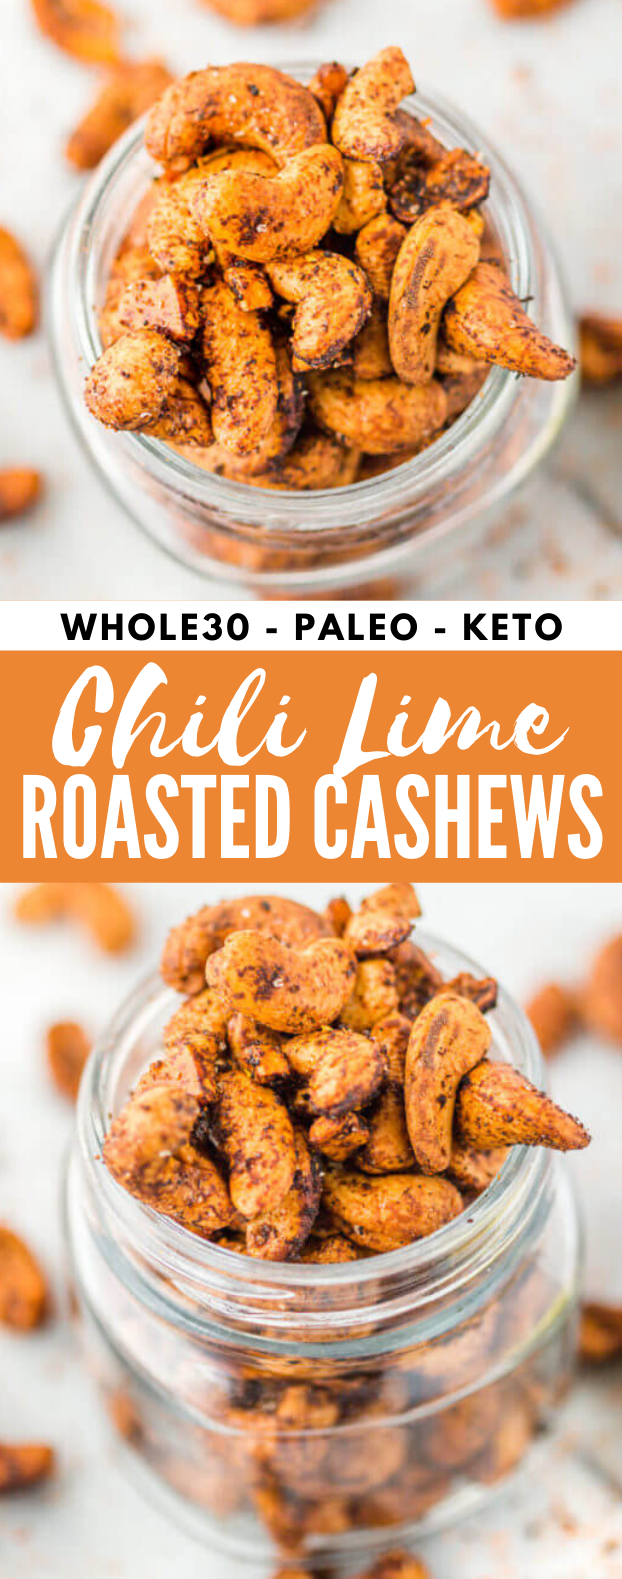 Whole30 Chili Lime Cashews #healthy #snacks #diet #ketogenic #lowcarb